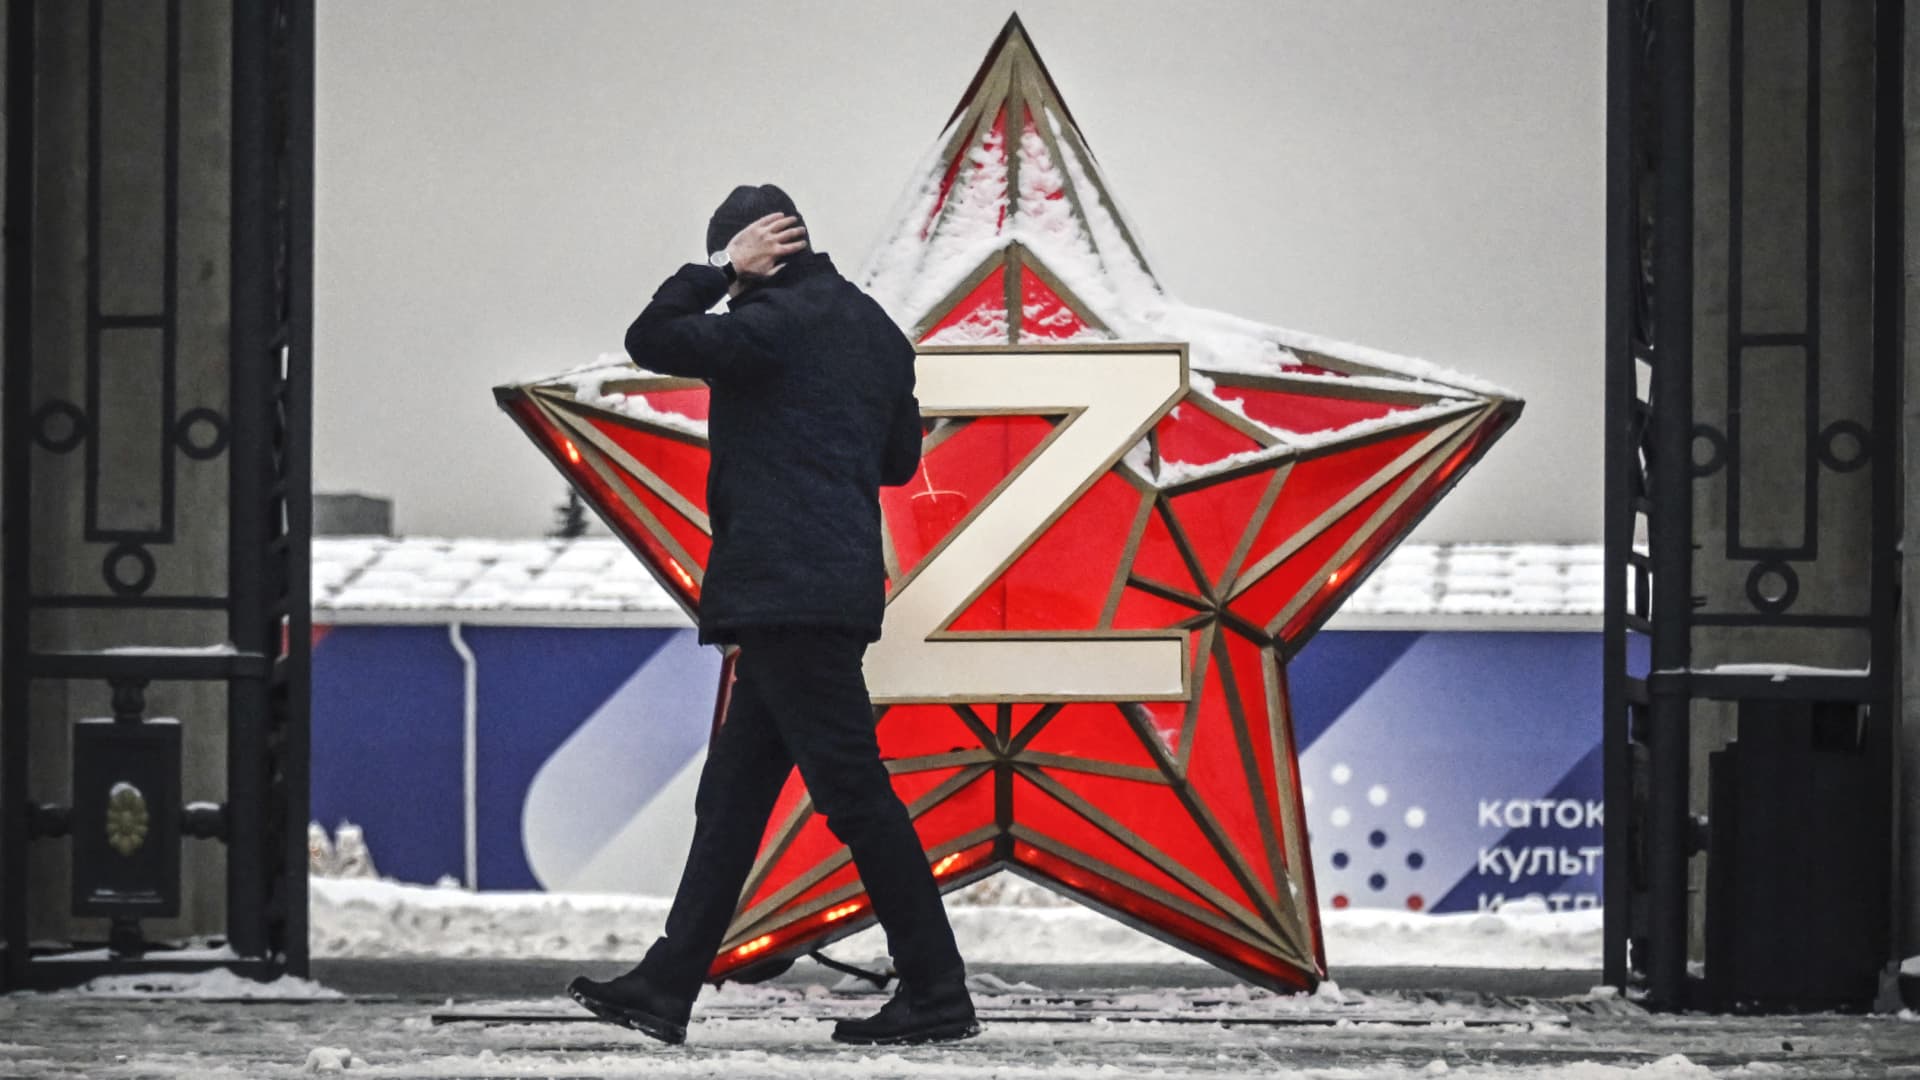 A person walks past a New Year decoration Kremlin Star, bearing a Z letter, a tactical insignia of Russian troops in Ukraine, at the Gorky Park in Moscow on December 29, 2022.